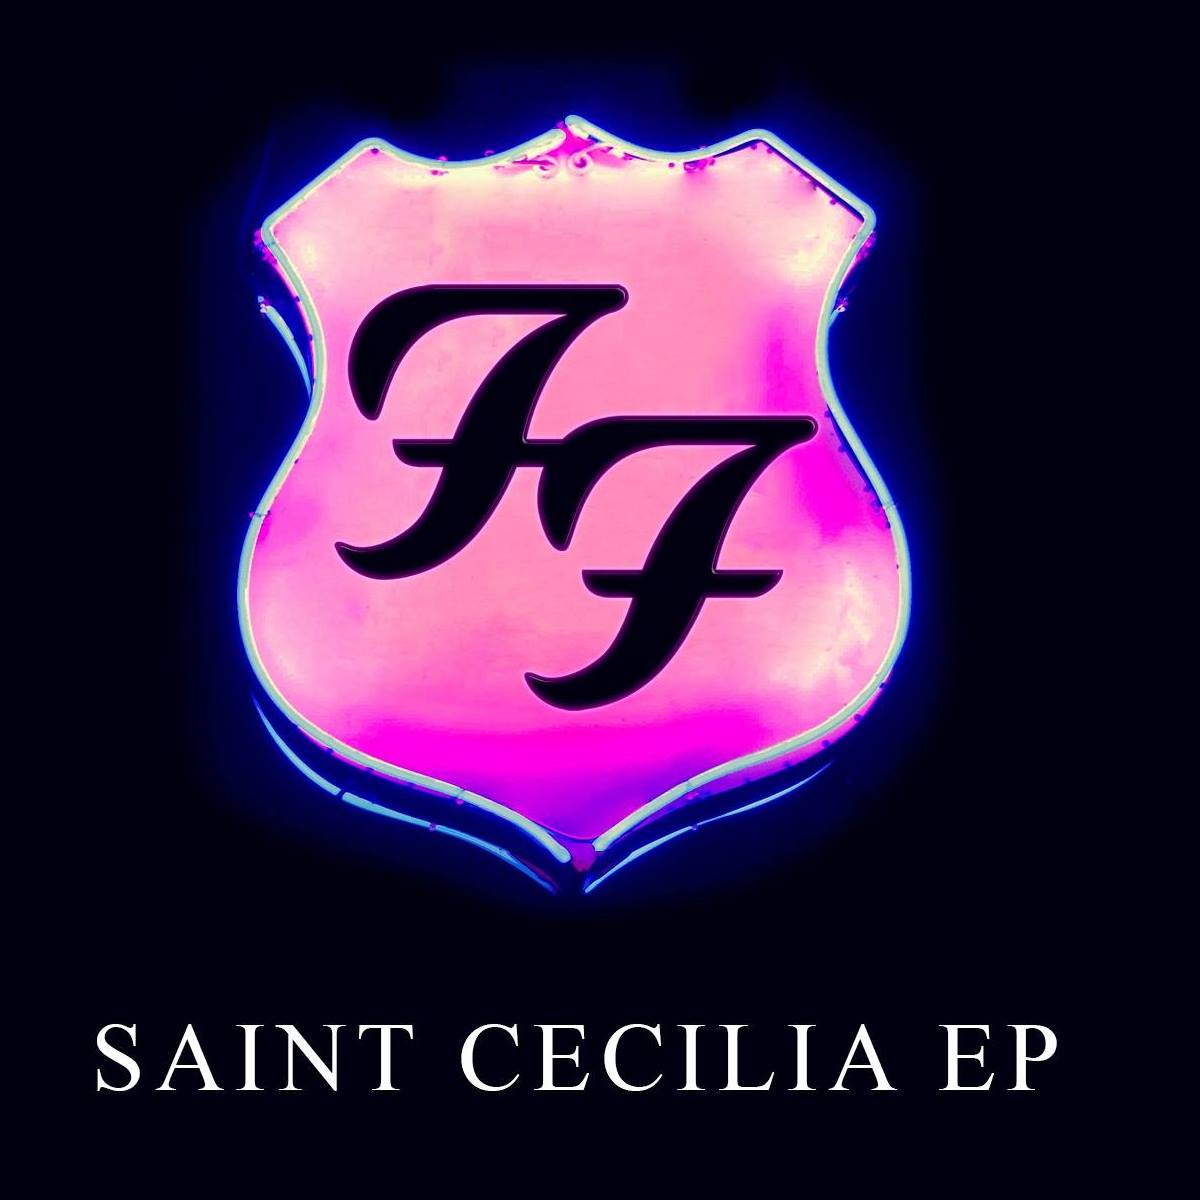 Foo Fighters Offer Free Download Of "Saint Cecilia" EP